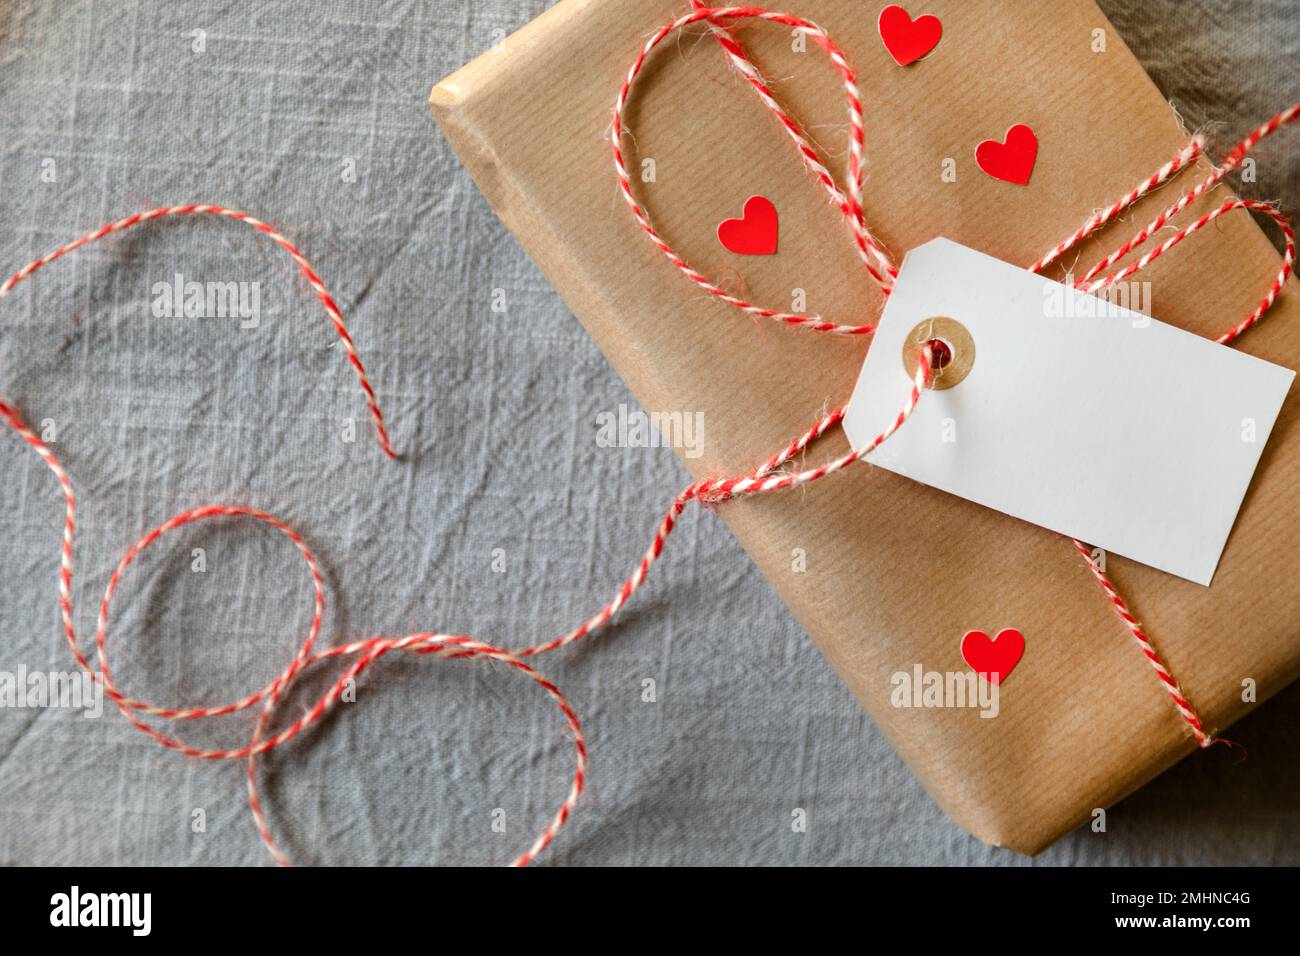 Christmas gift with greeting card Stock Photo